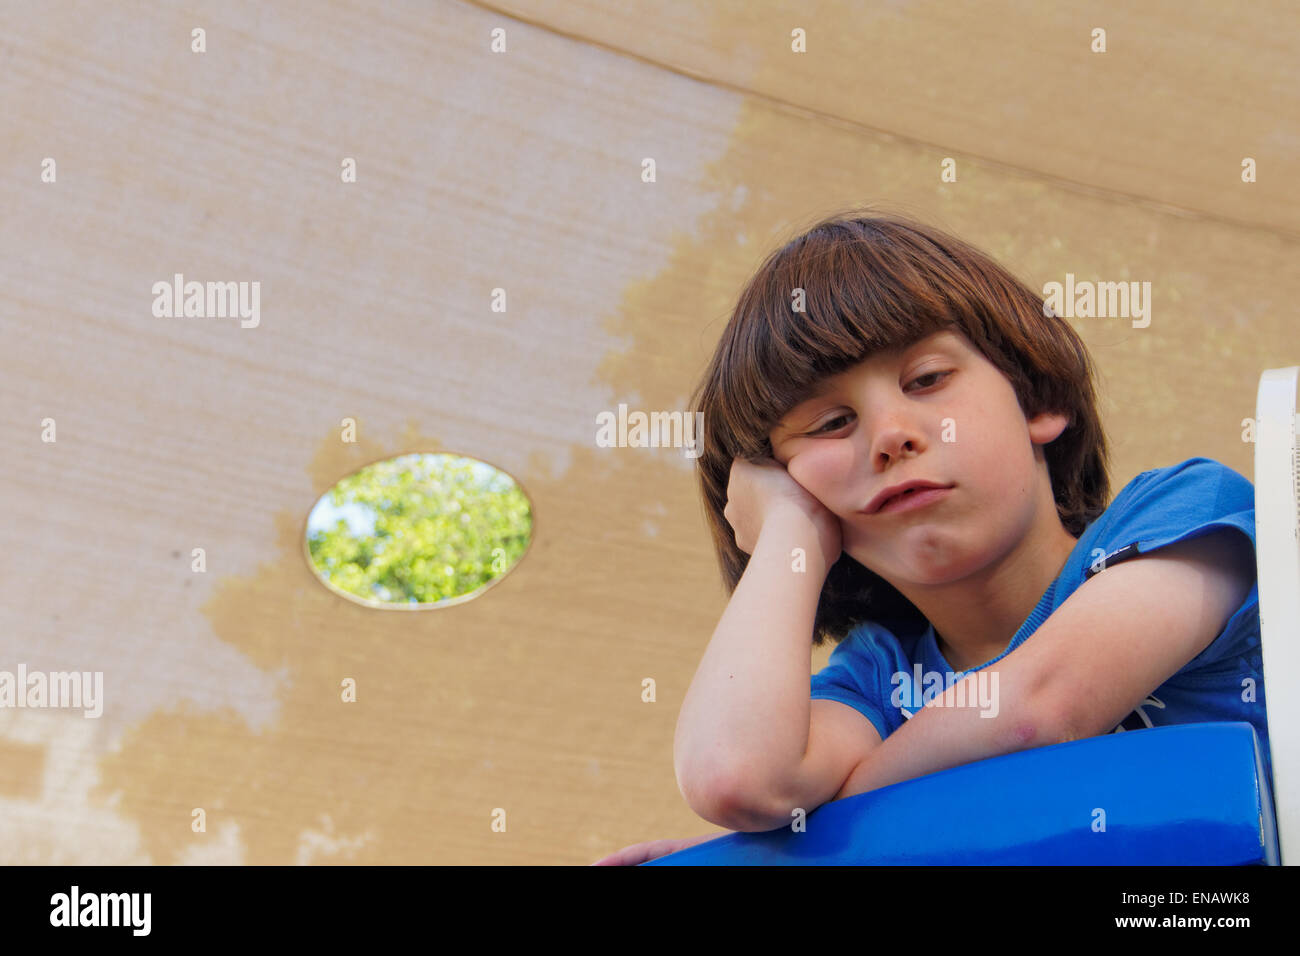 Young boy plays alone in the playground Stock Photo